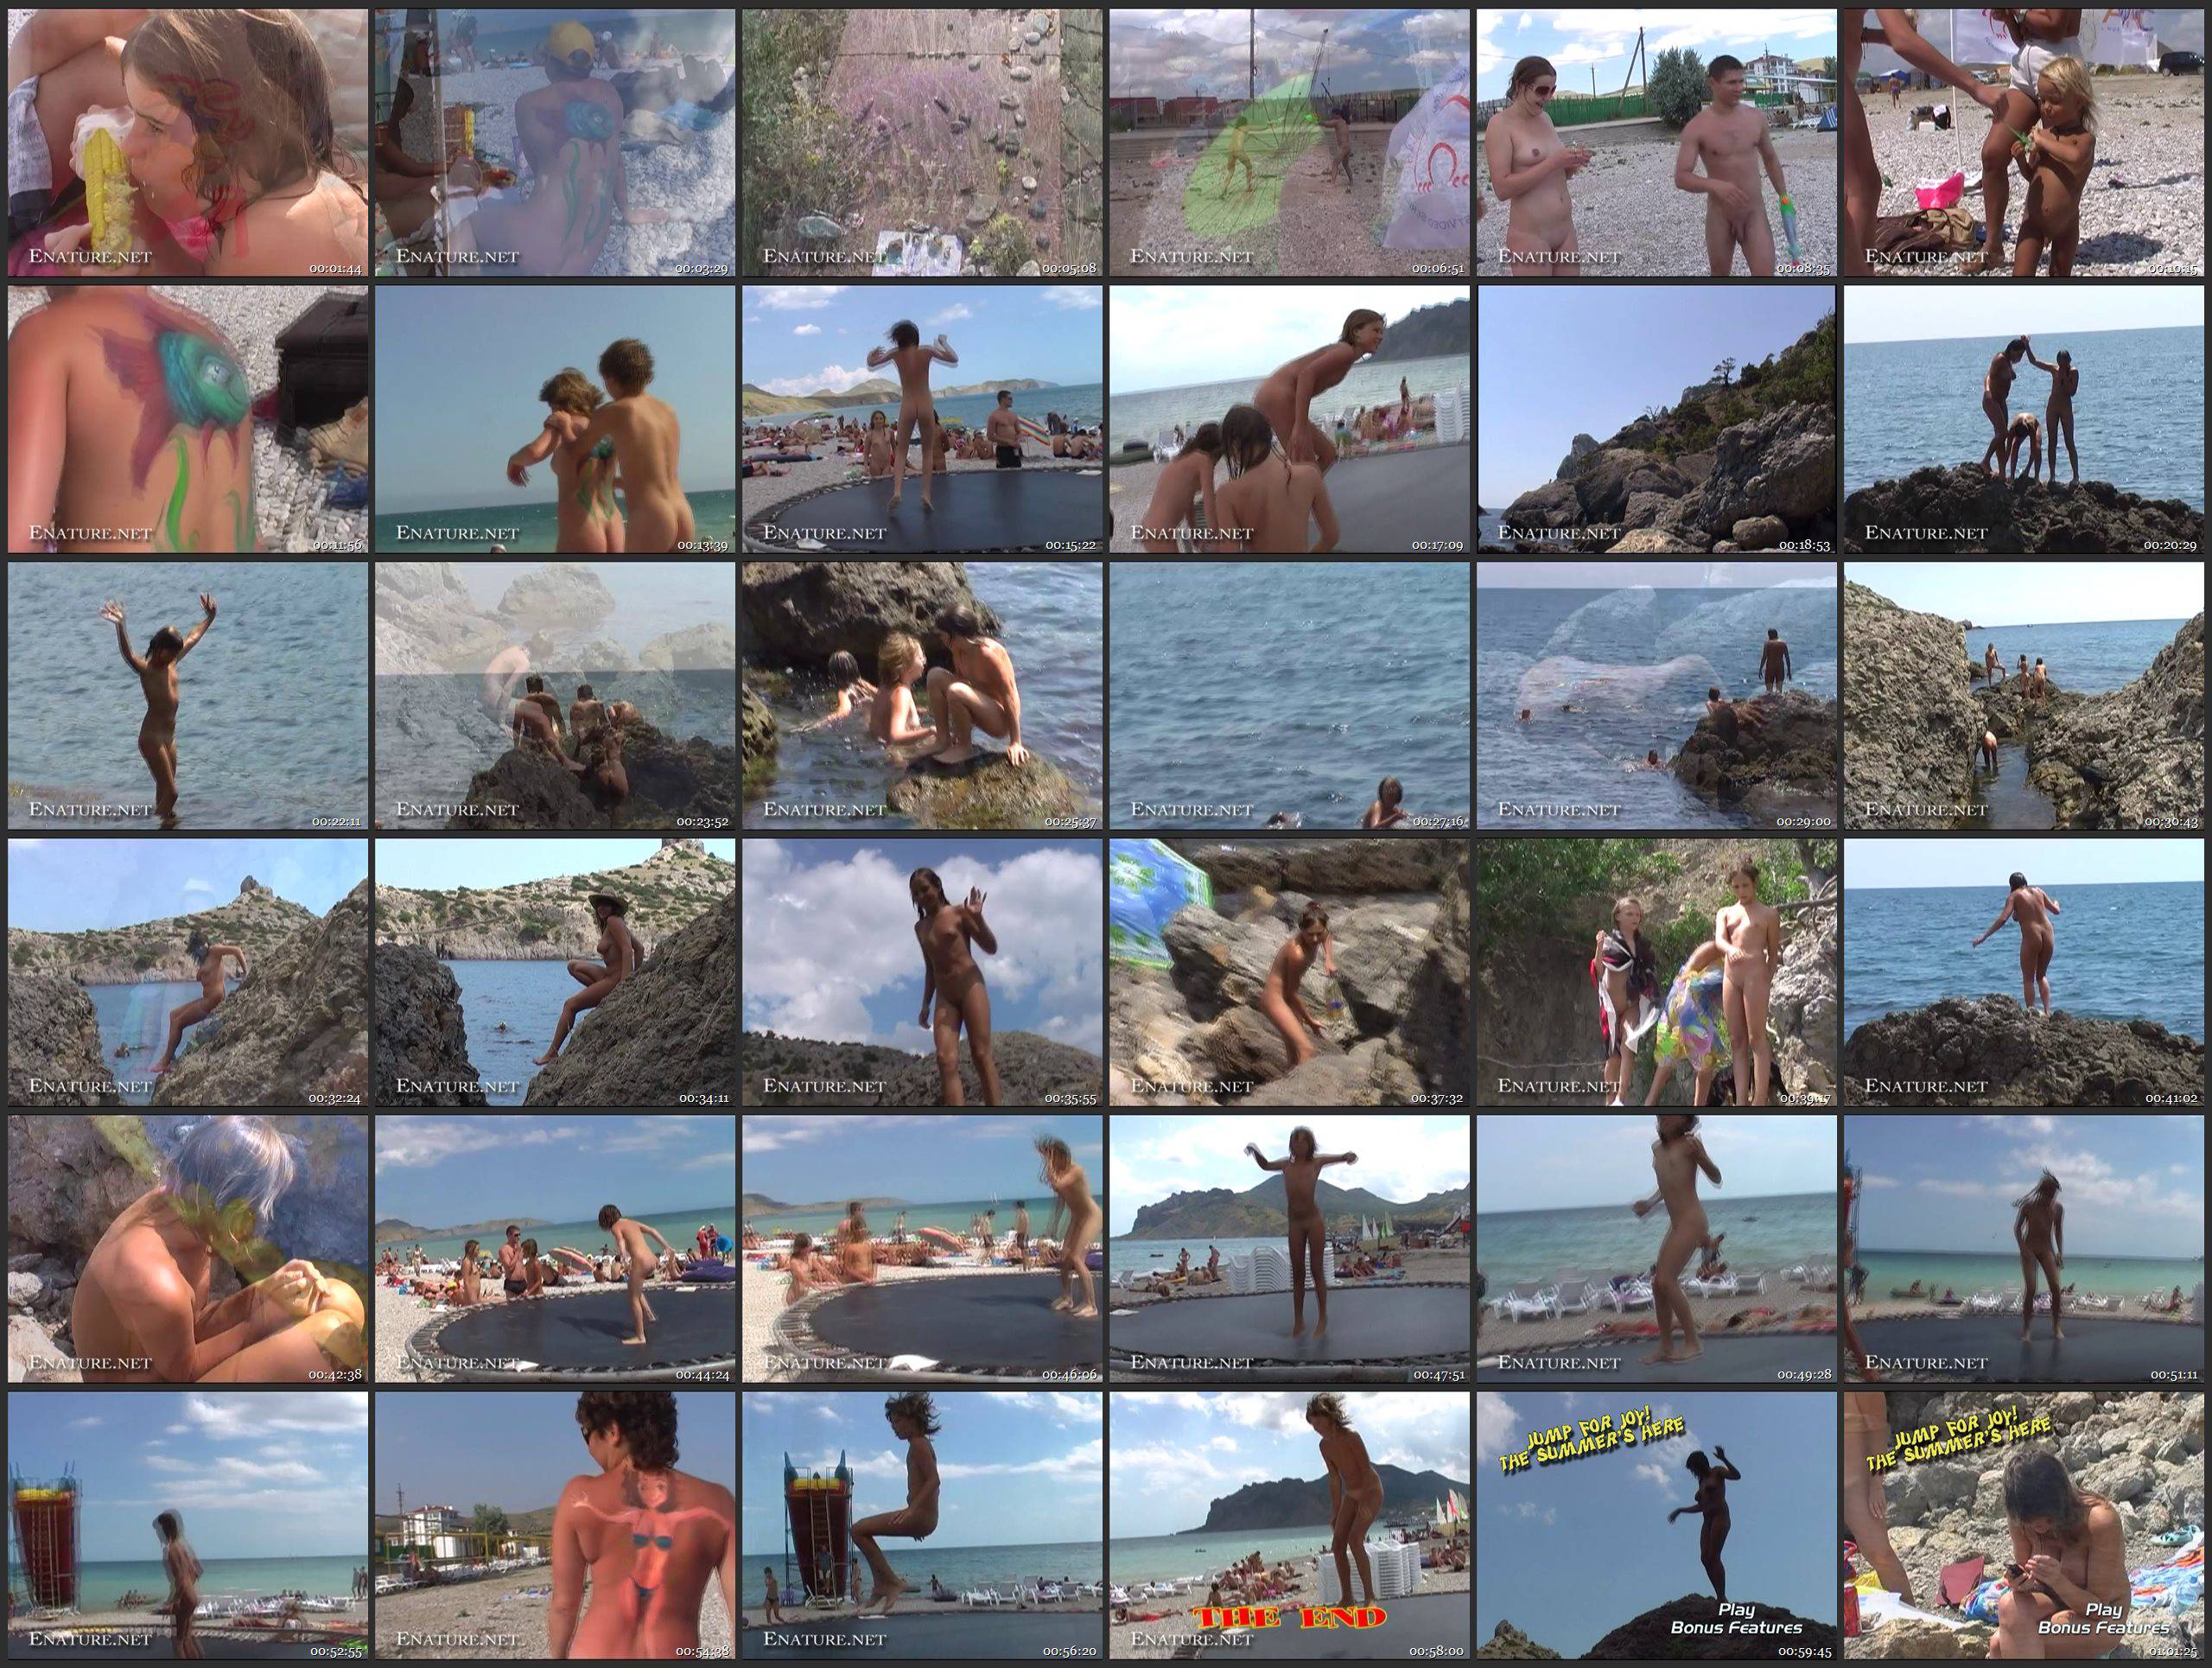 RussianBare Videos Jump for Joy! The Summer's Here - Thumbnails